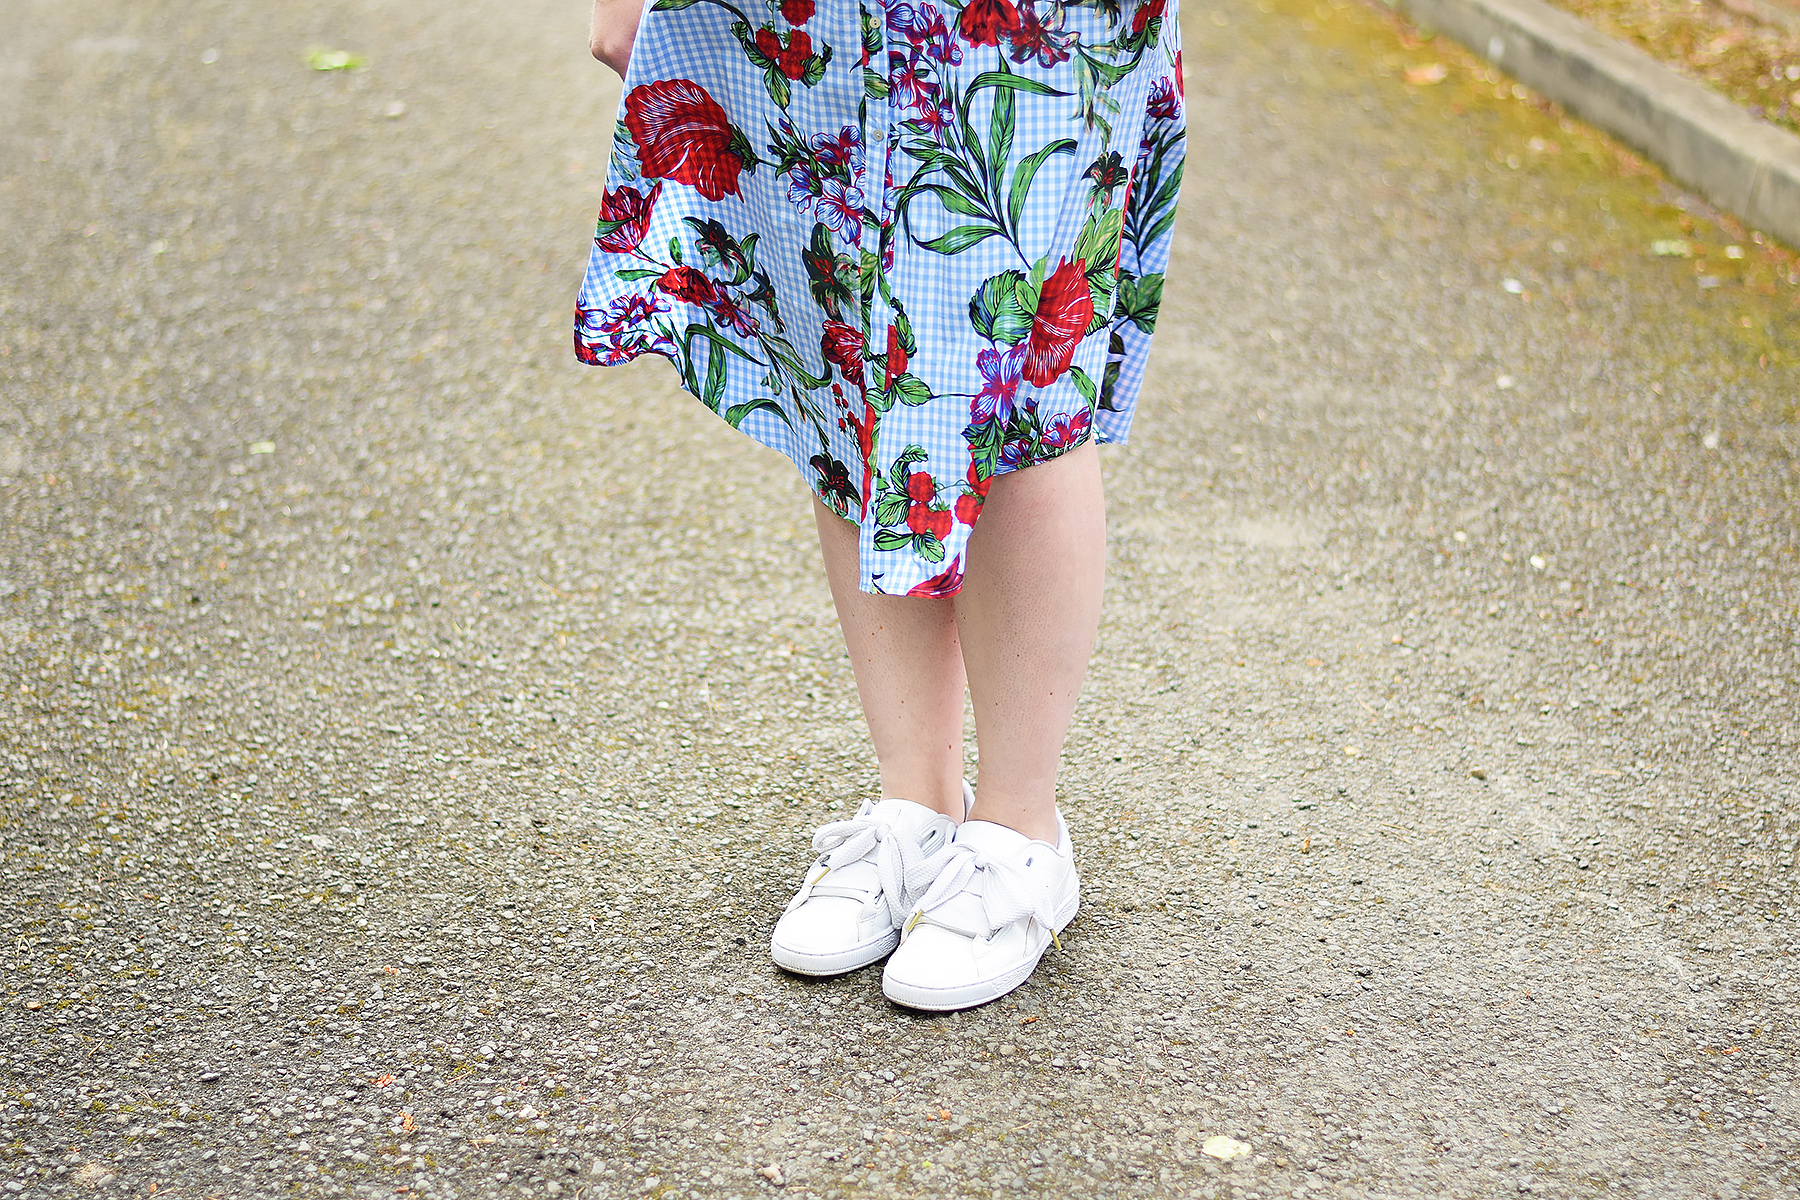 Floral dress and trainers